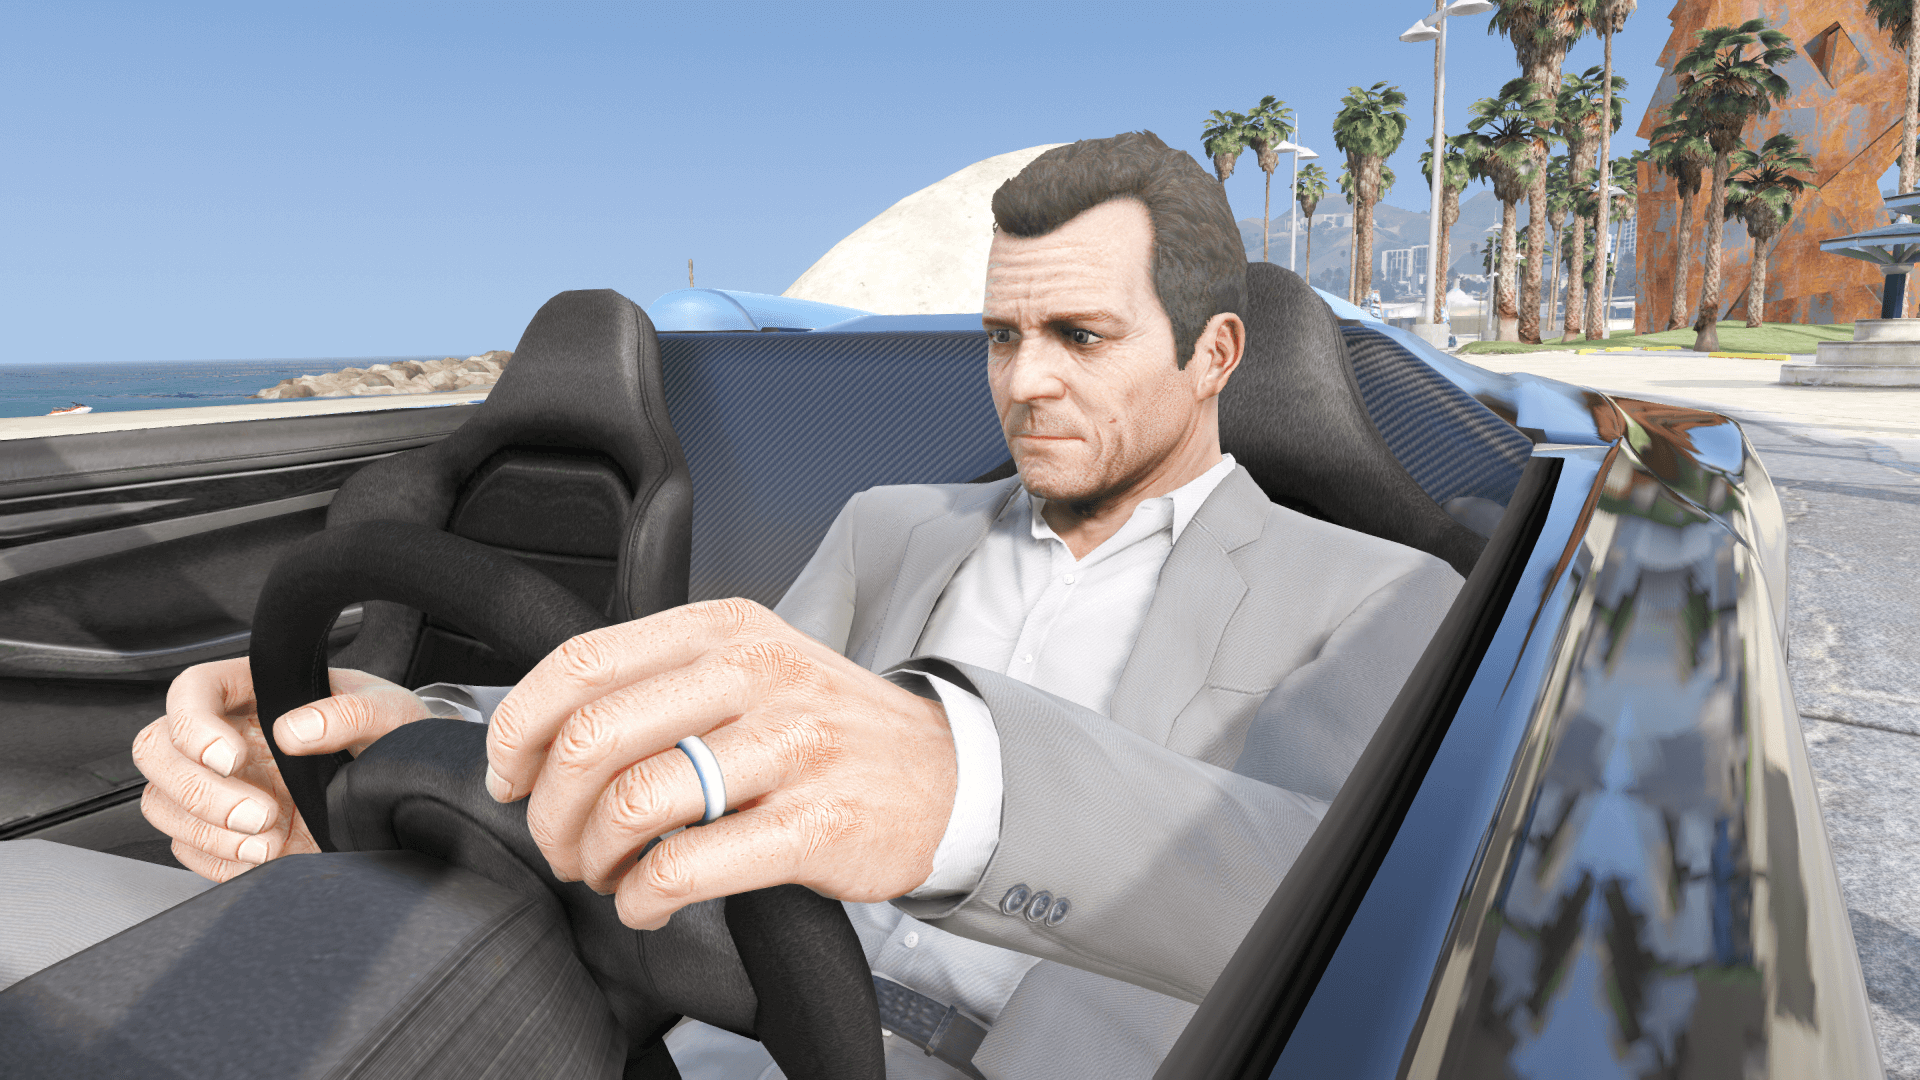 Older Michael Retexture Based On Trailers 1 And 2 Gta5